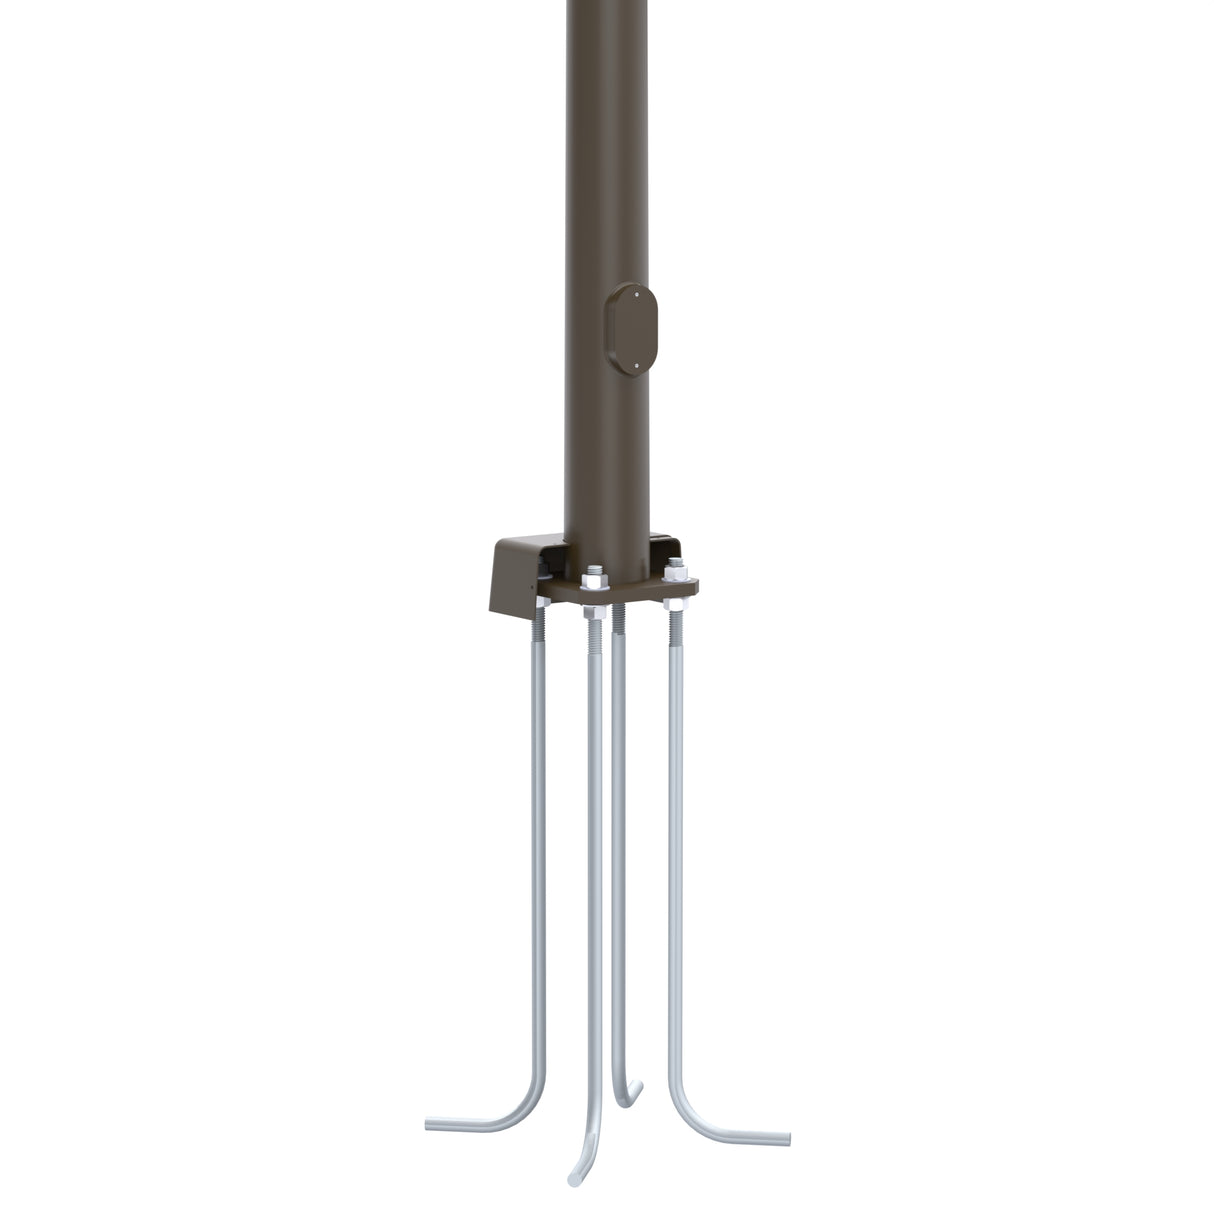 70' Tall x 13" Base OD x 3.6" Top OD x 5 & 7ga Thick, Round Tapered Steel, Anchor Base Light Pole